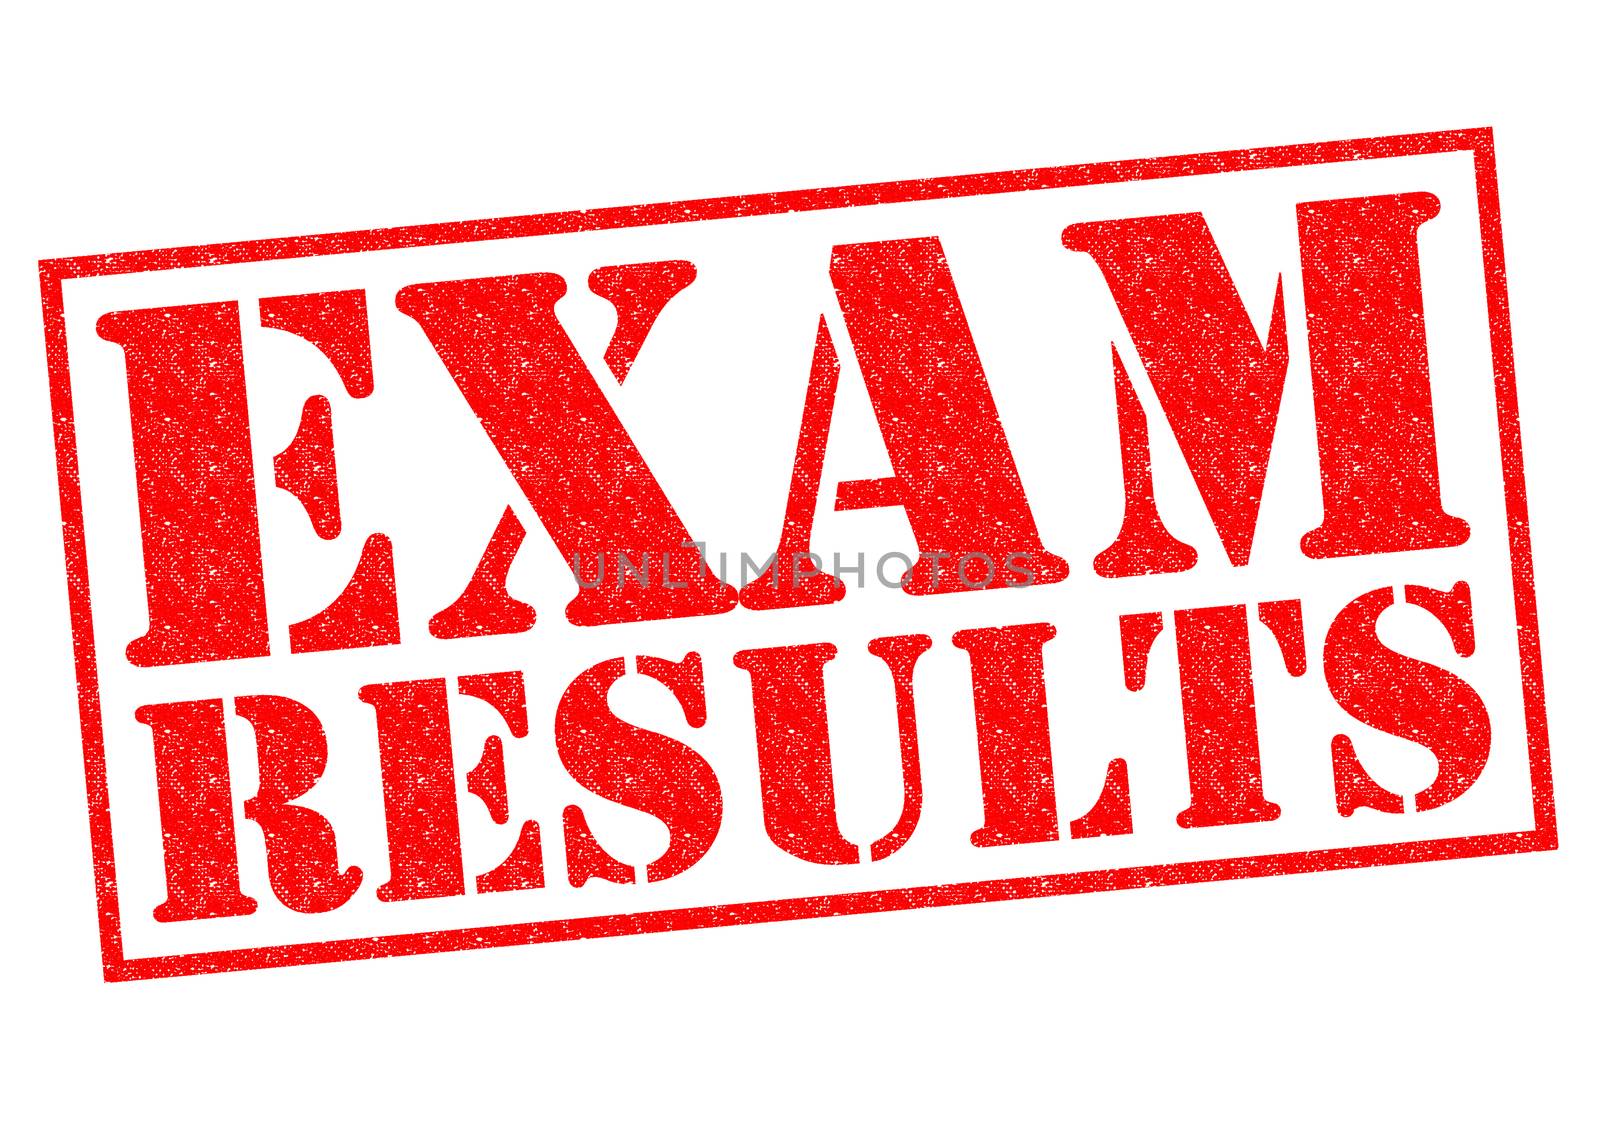 EXAM RESULTS red Rubber Stamp over a white background.